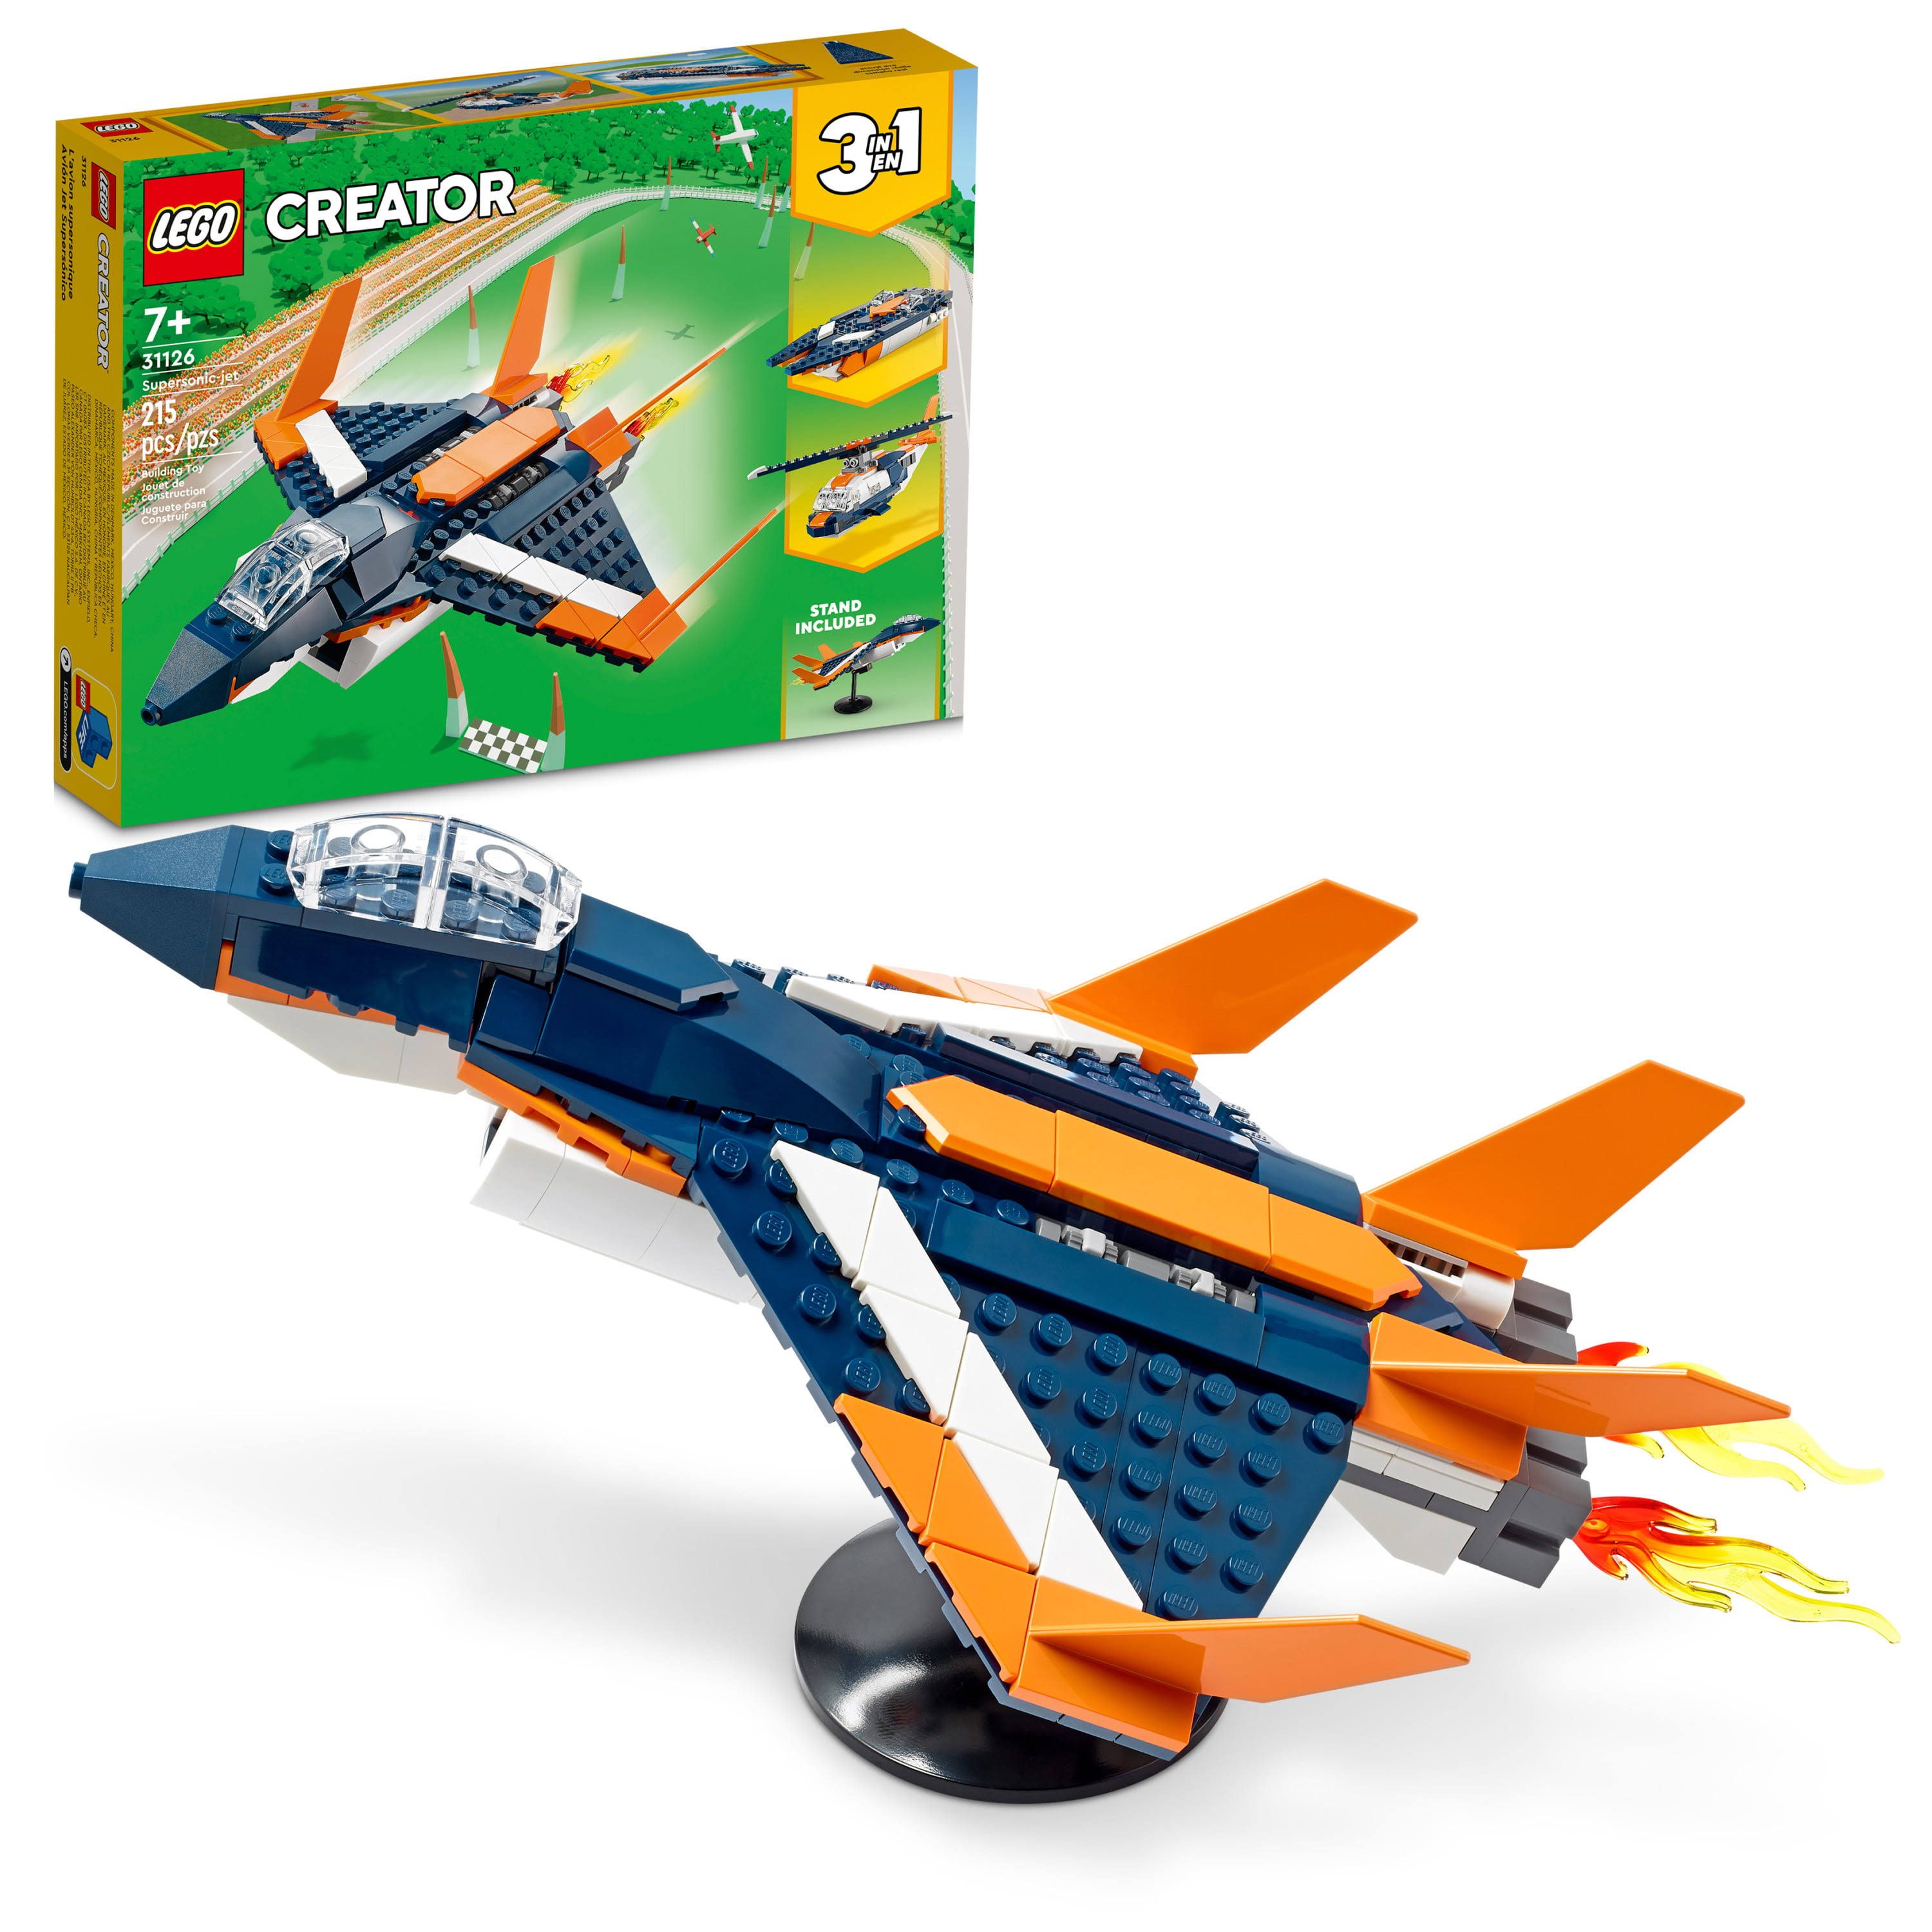 LEGO Creator 3in1 Supersonic-jet 31126 Building Kit; Build A Jet Plan